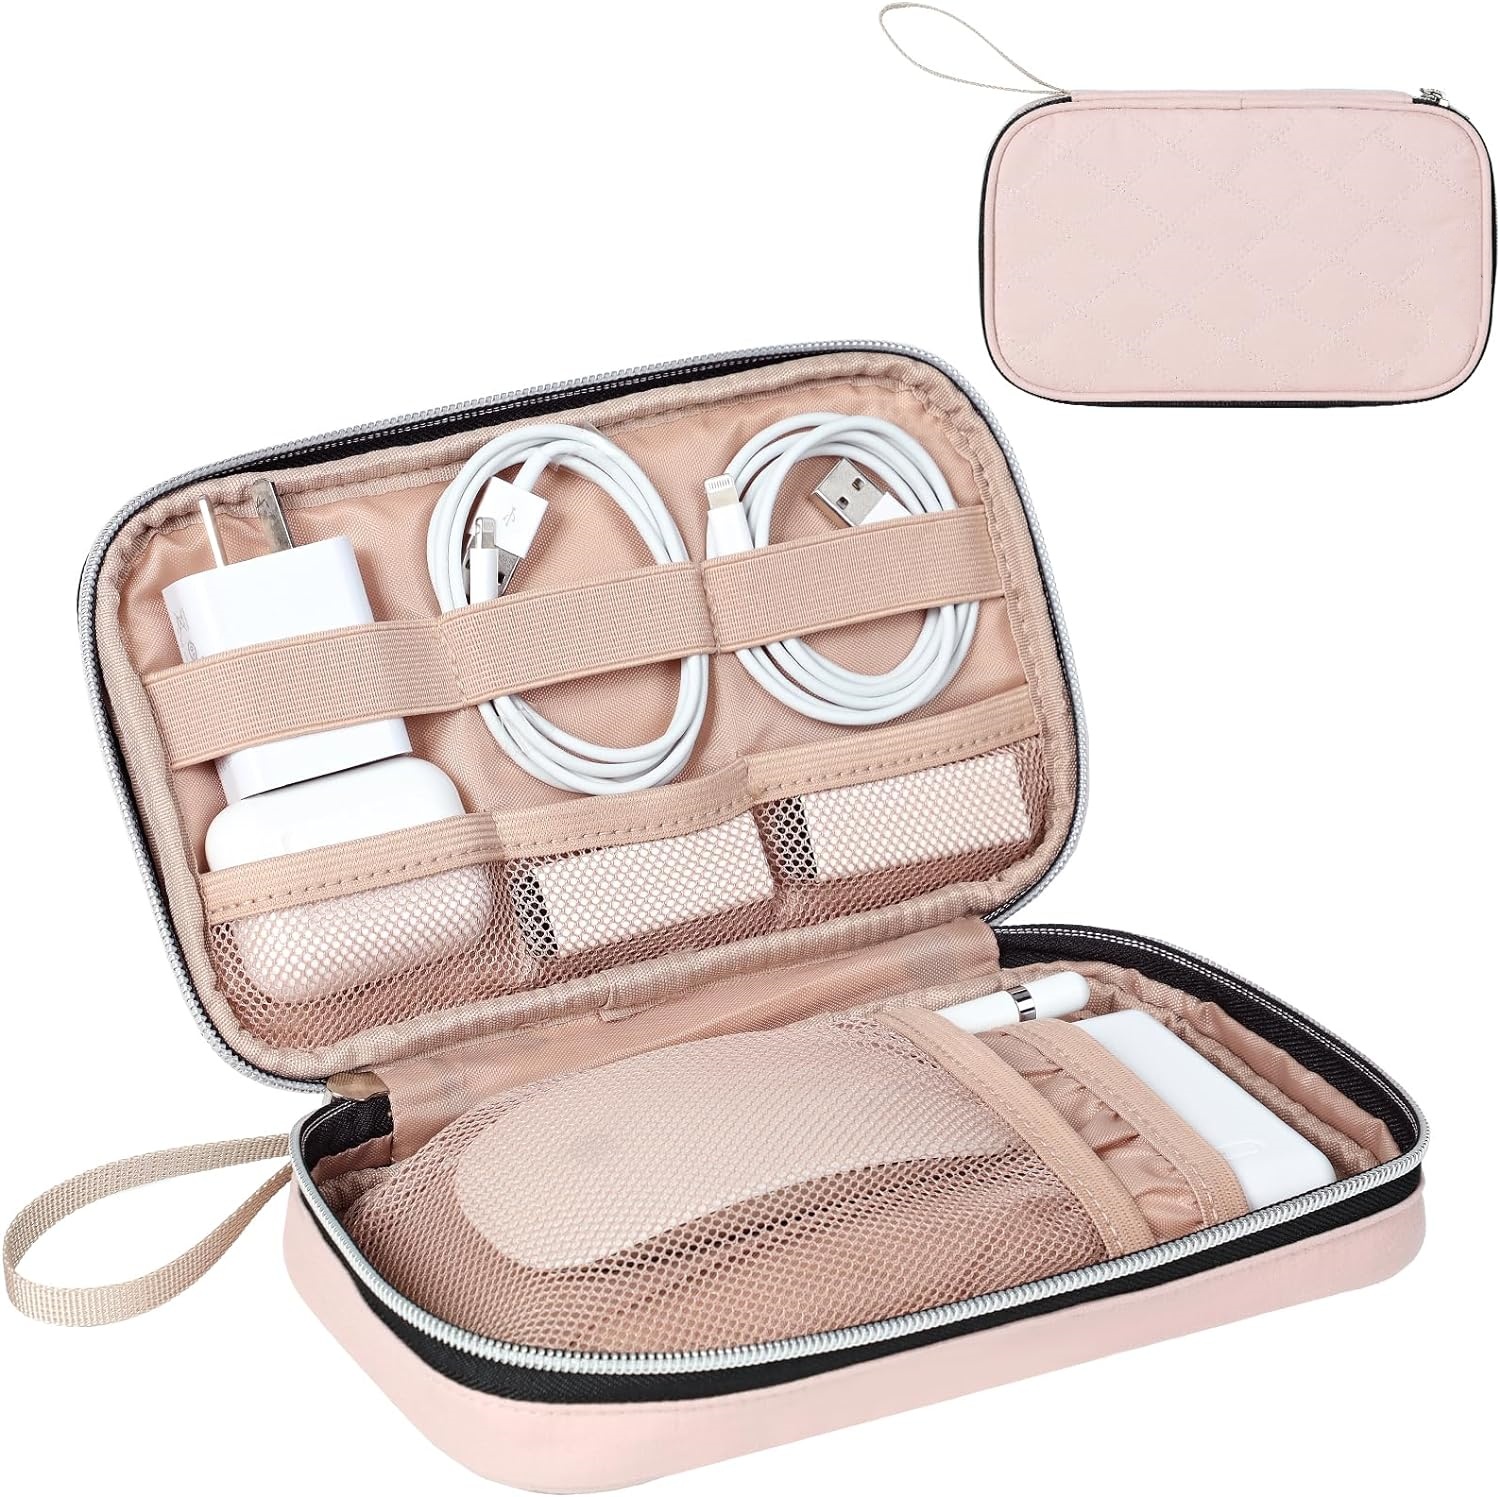 Electronics Storage Travel Case, Cord Organizer for Daily Trips,Portable Cable Pouch for Cord, Hard Drive, Charger, Phone, Earphone, USB, SD Card and Electronic Accessories, Pink